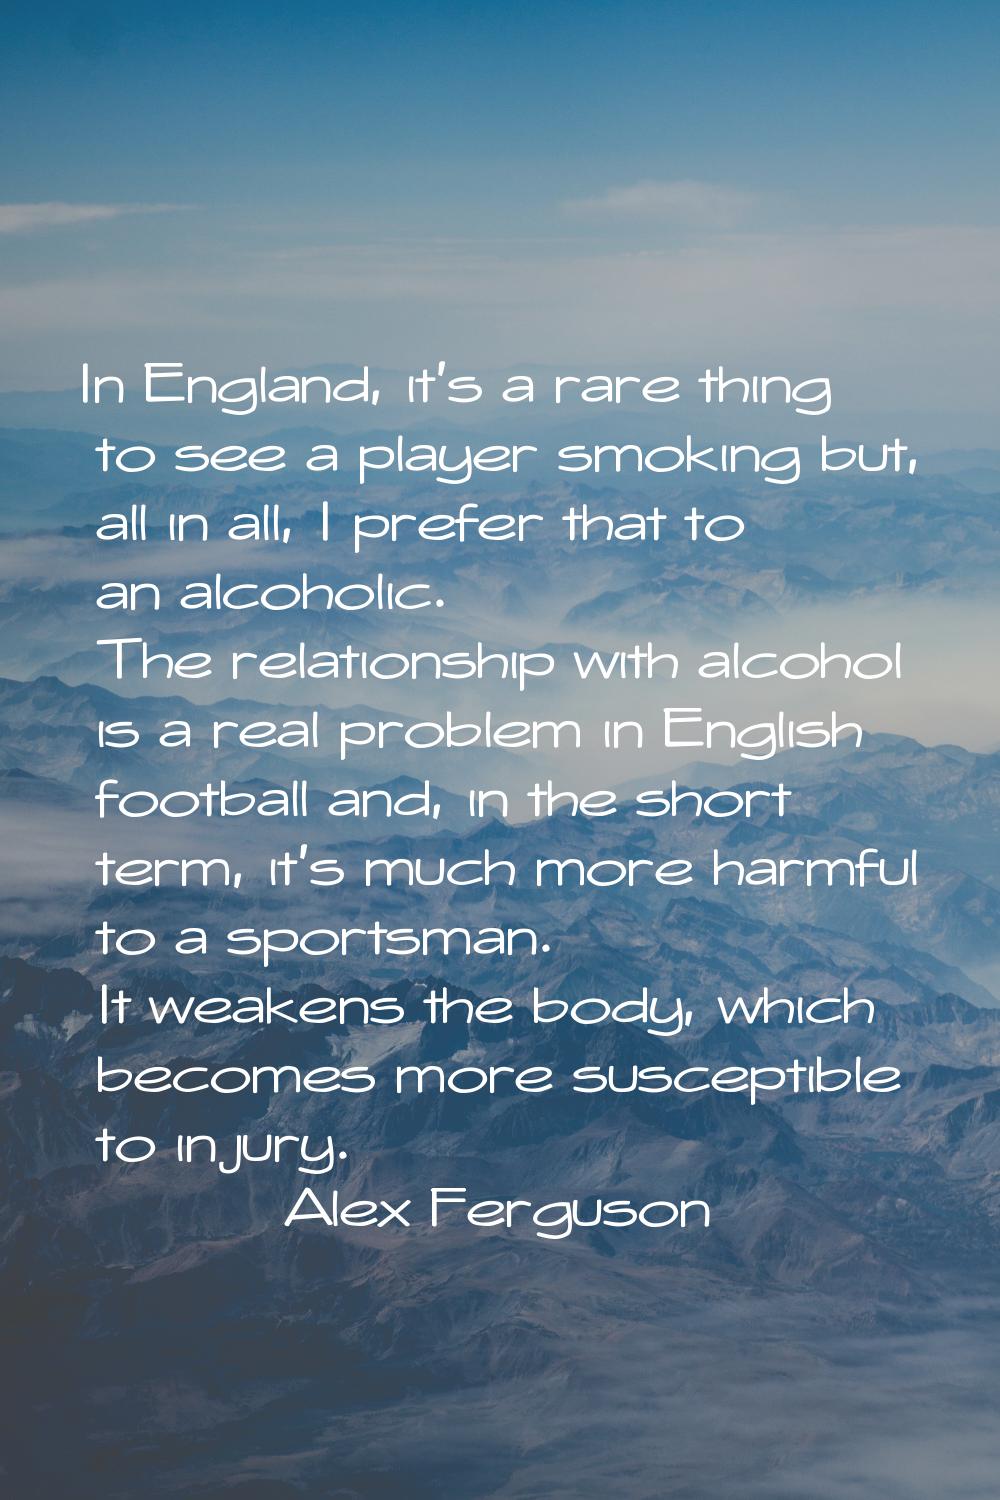 In England, it's a rare thing to see a player smoking but, all in all, I prefer that to an alcoholi